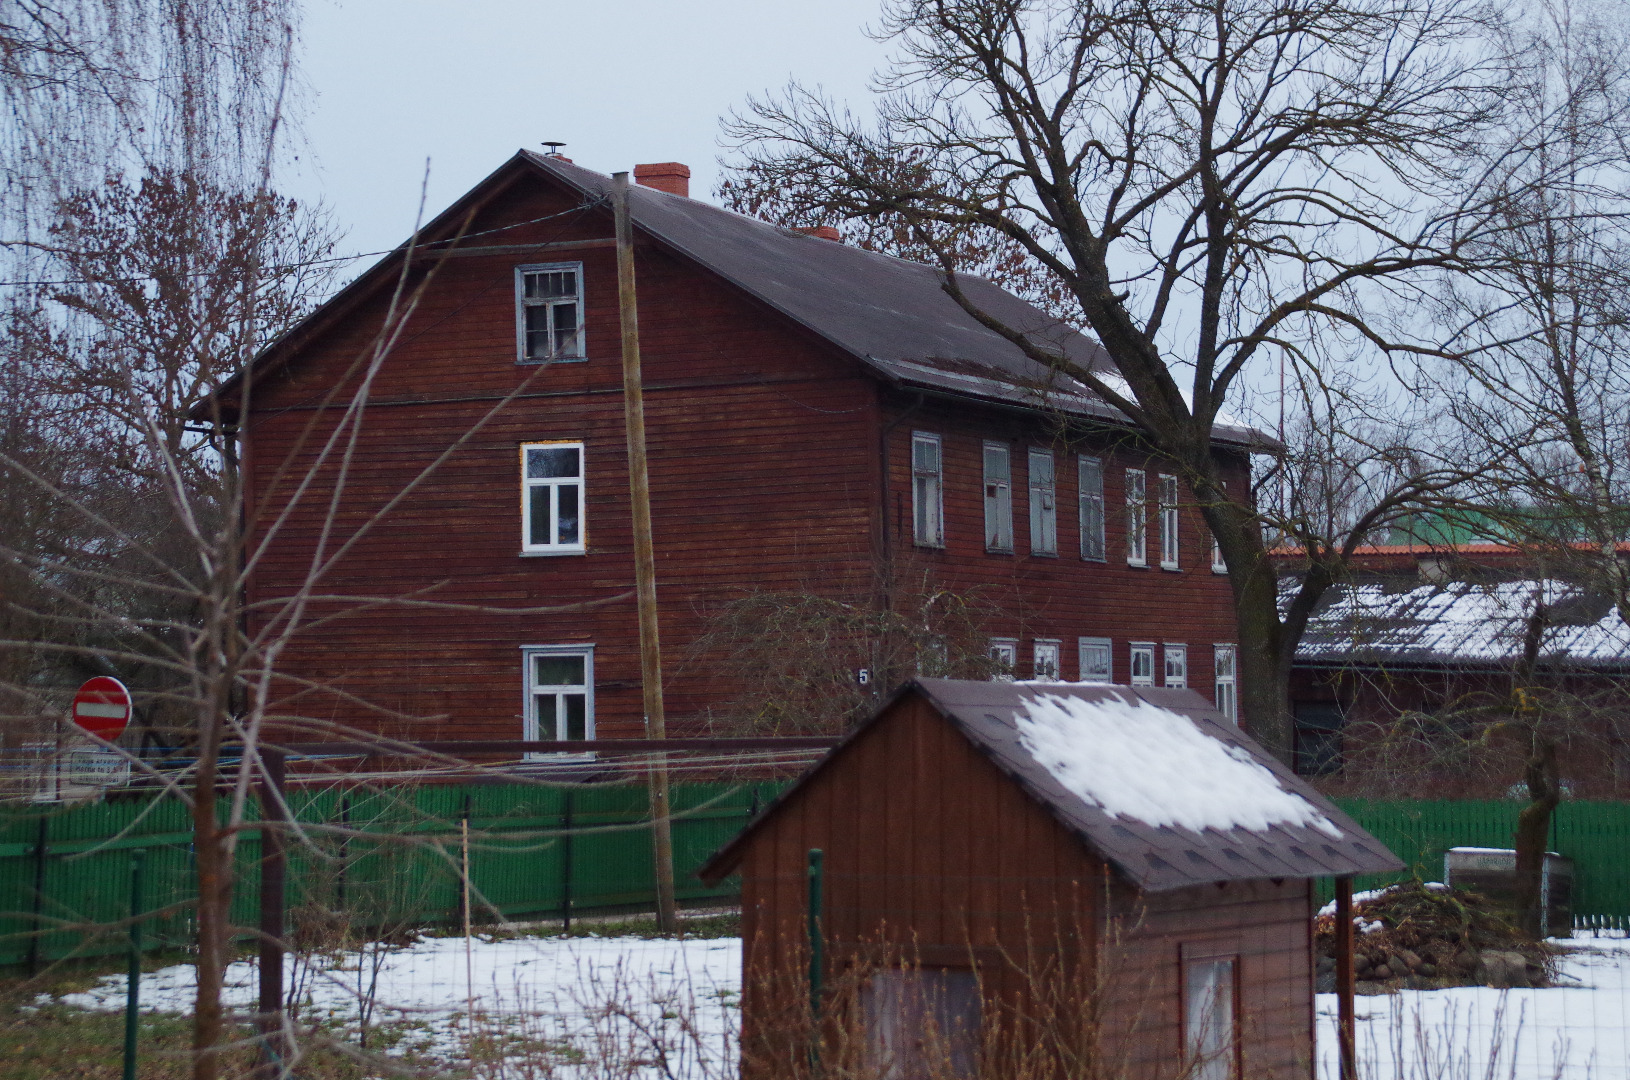 Tartu, Herne 5. The house is located on the side of the Herne Street, approximately 80 m from the street, inside the garden. rephoto